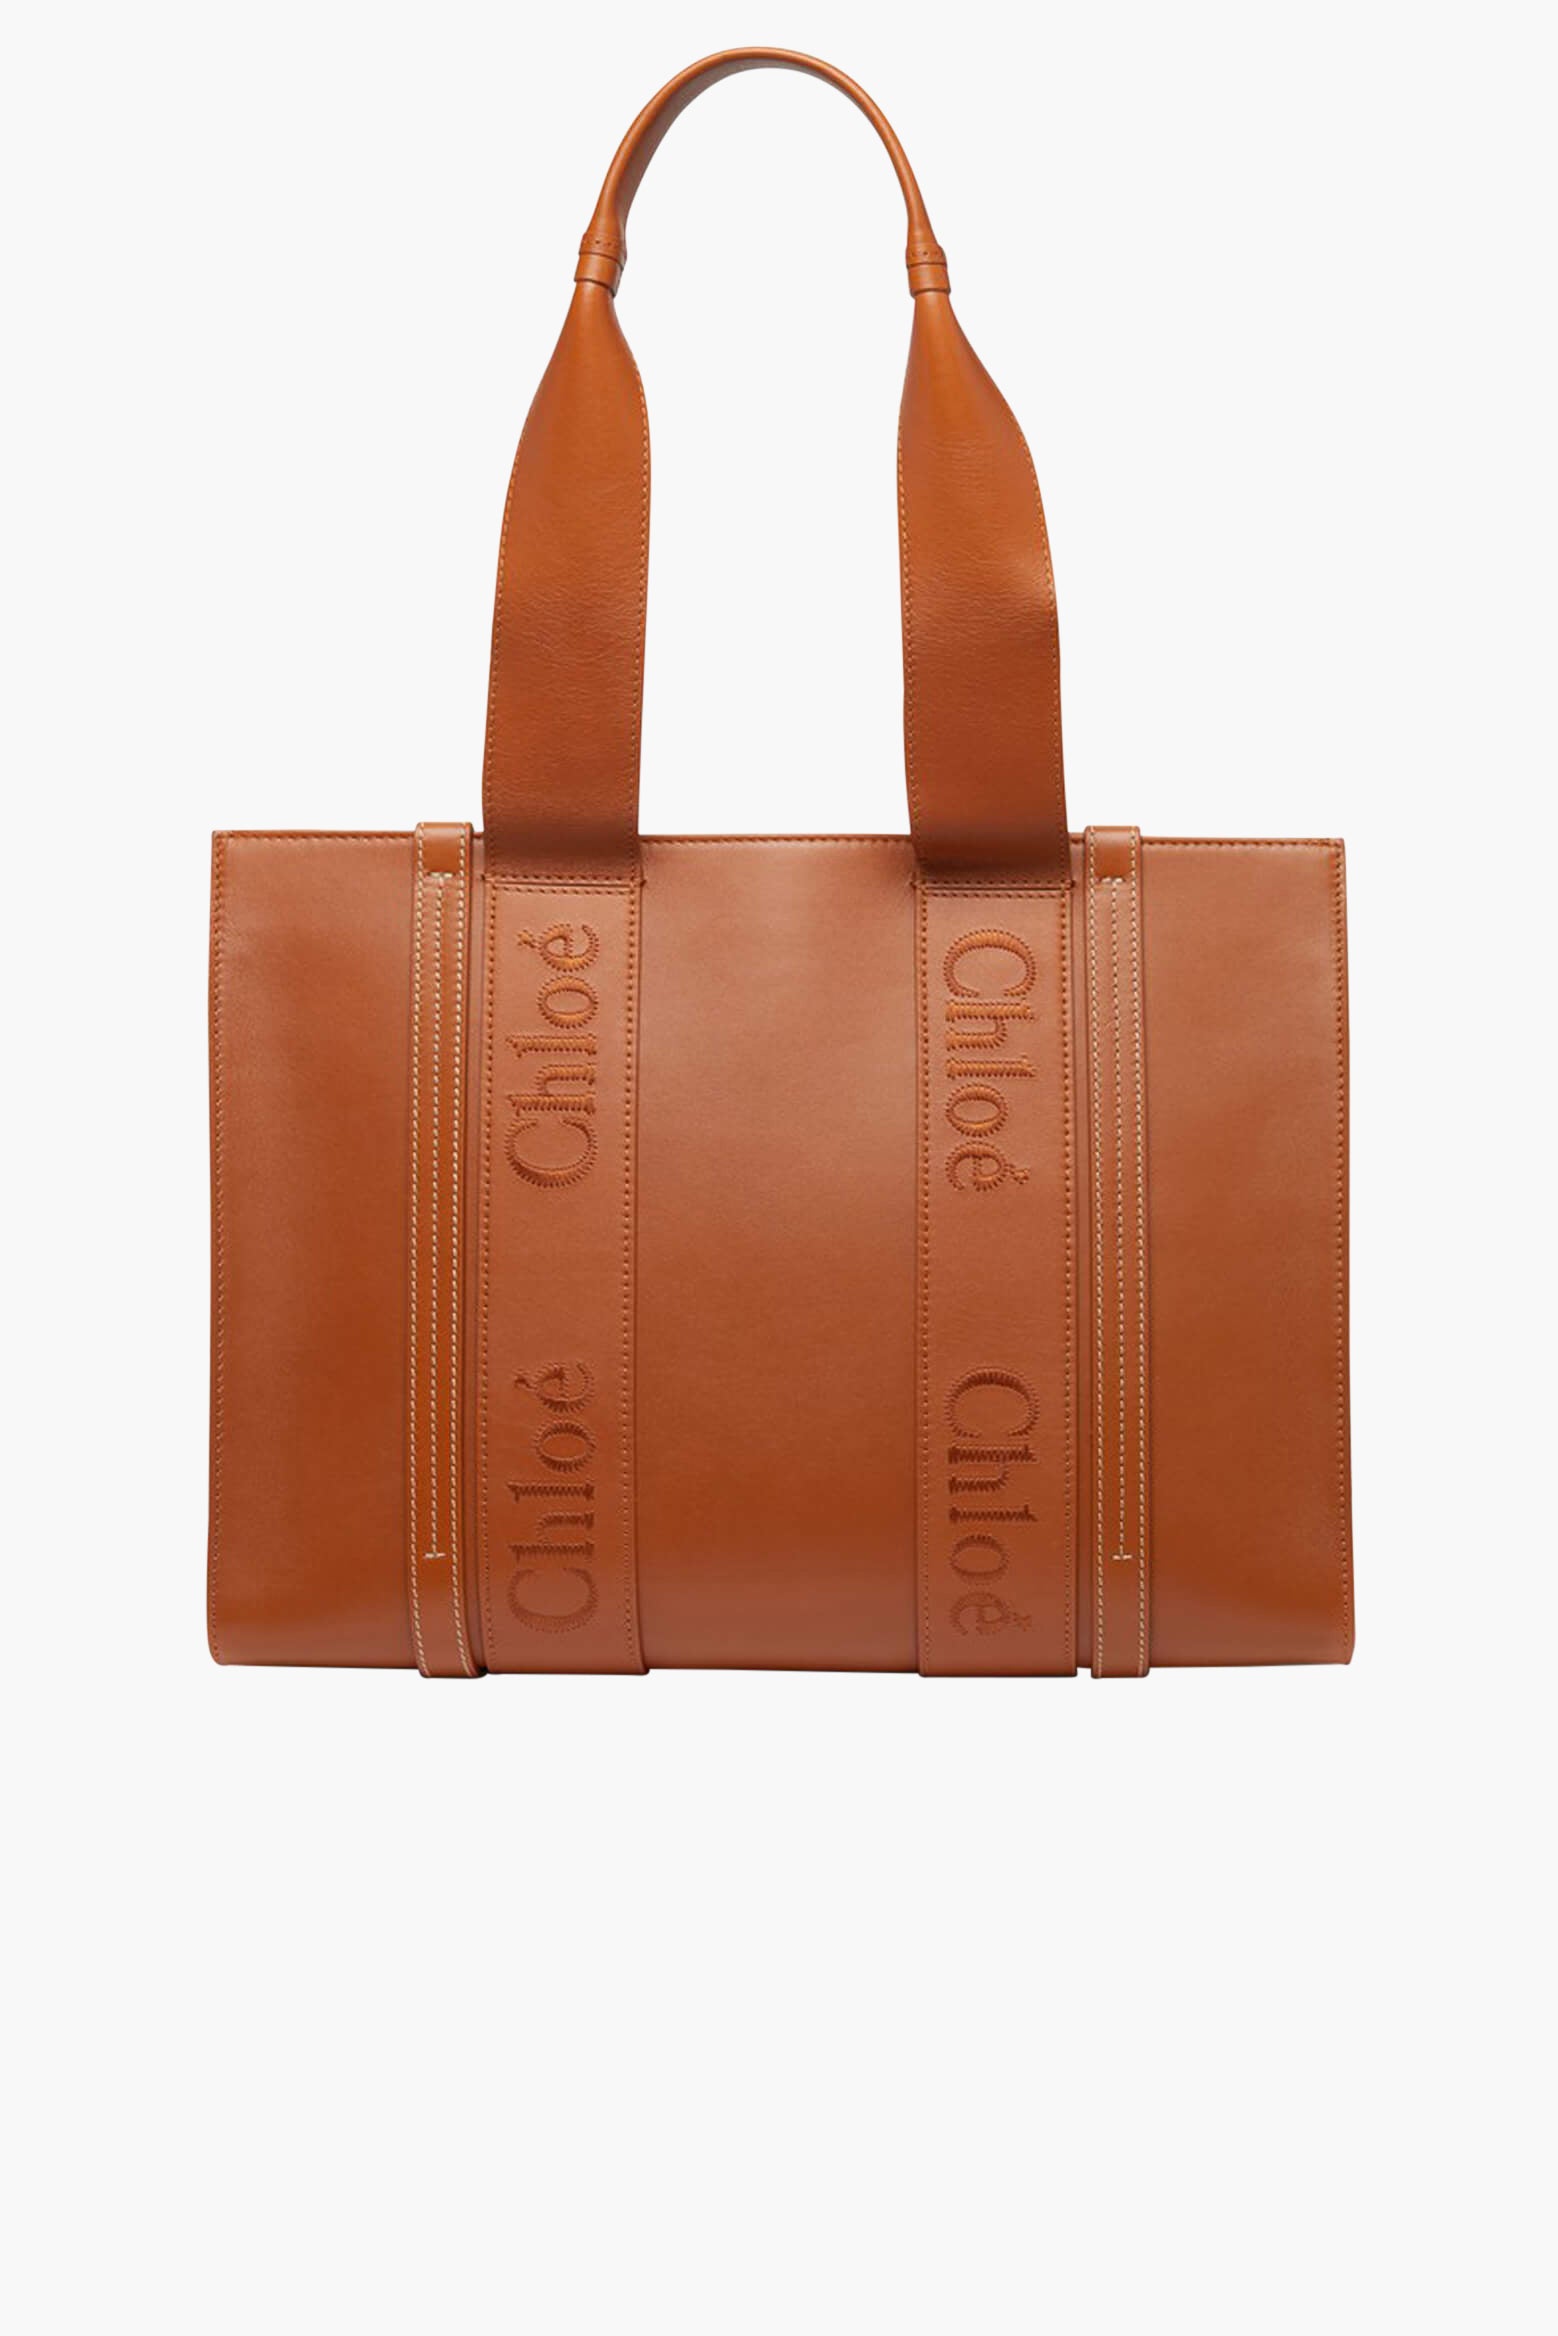 Chloé Woody Medium Leather Tote in Caramel available at The New Trend